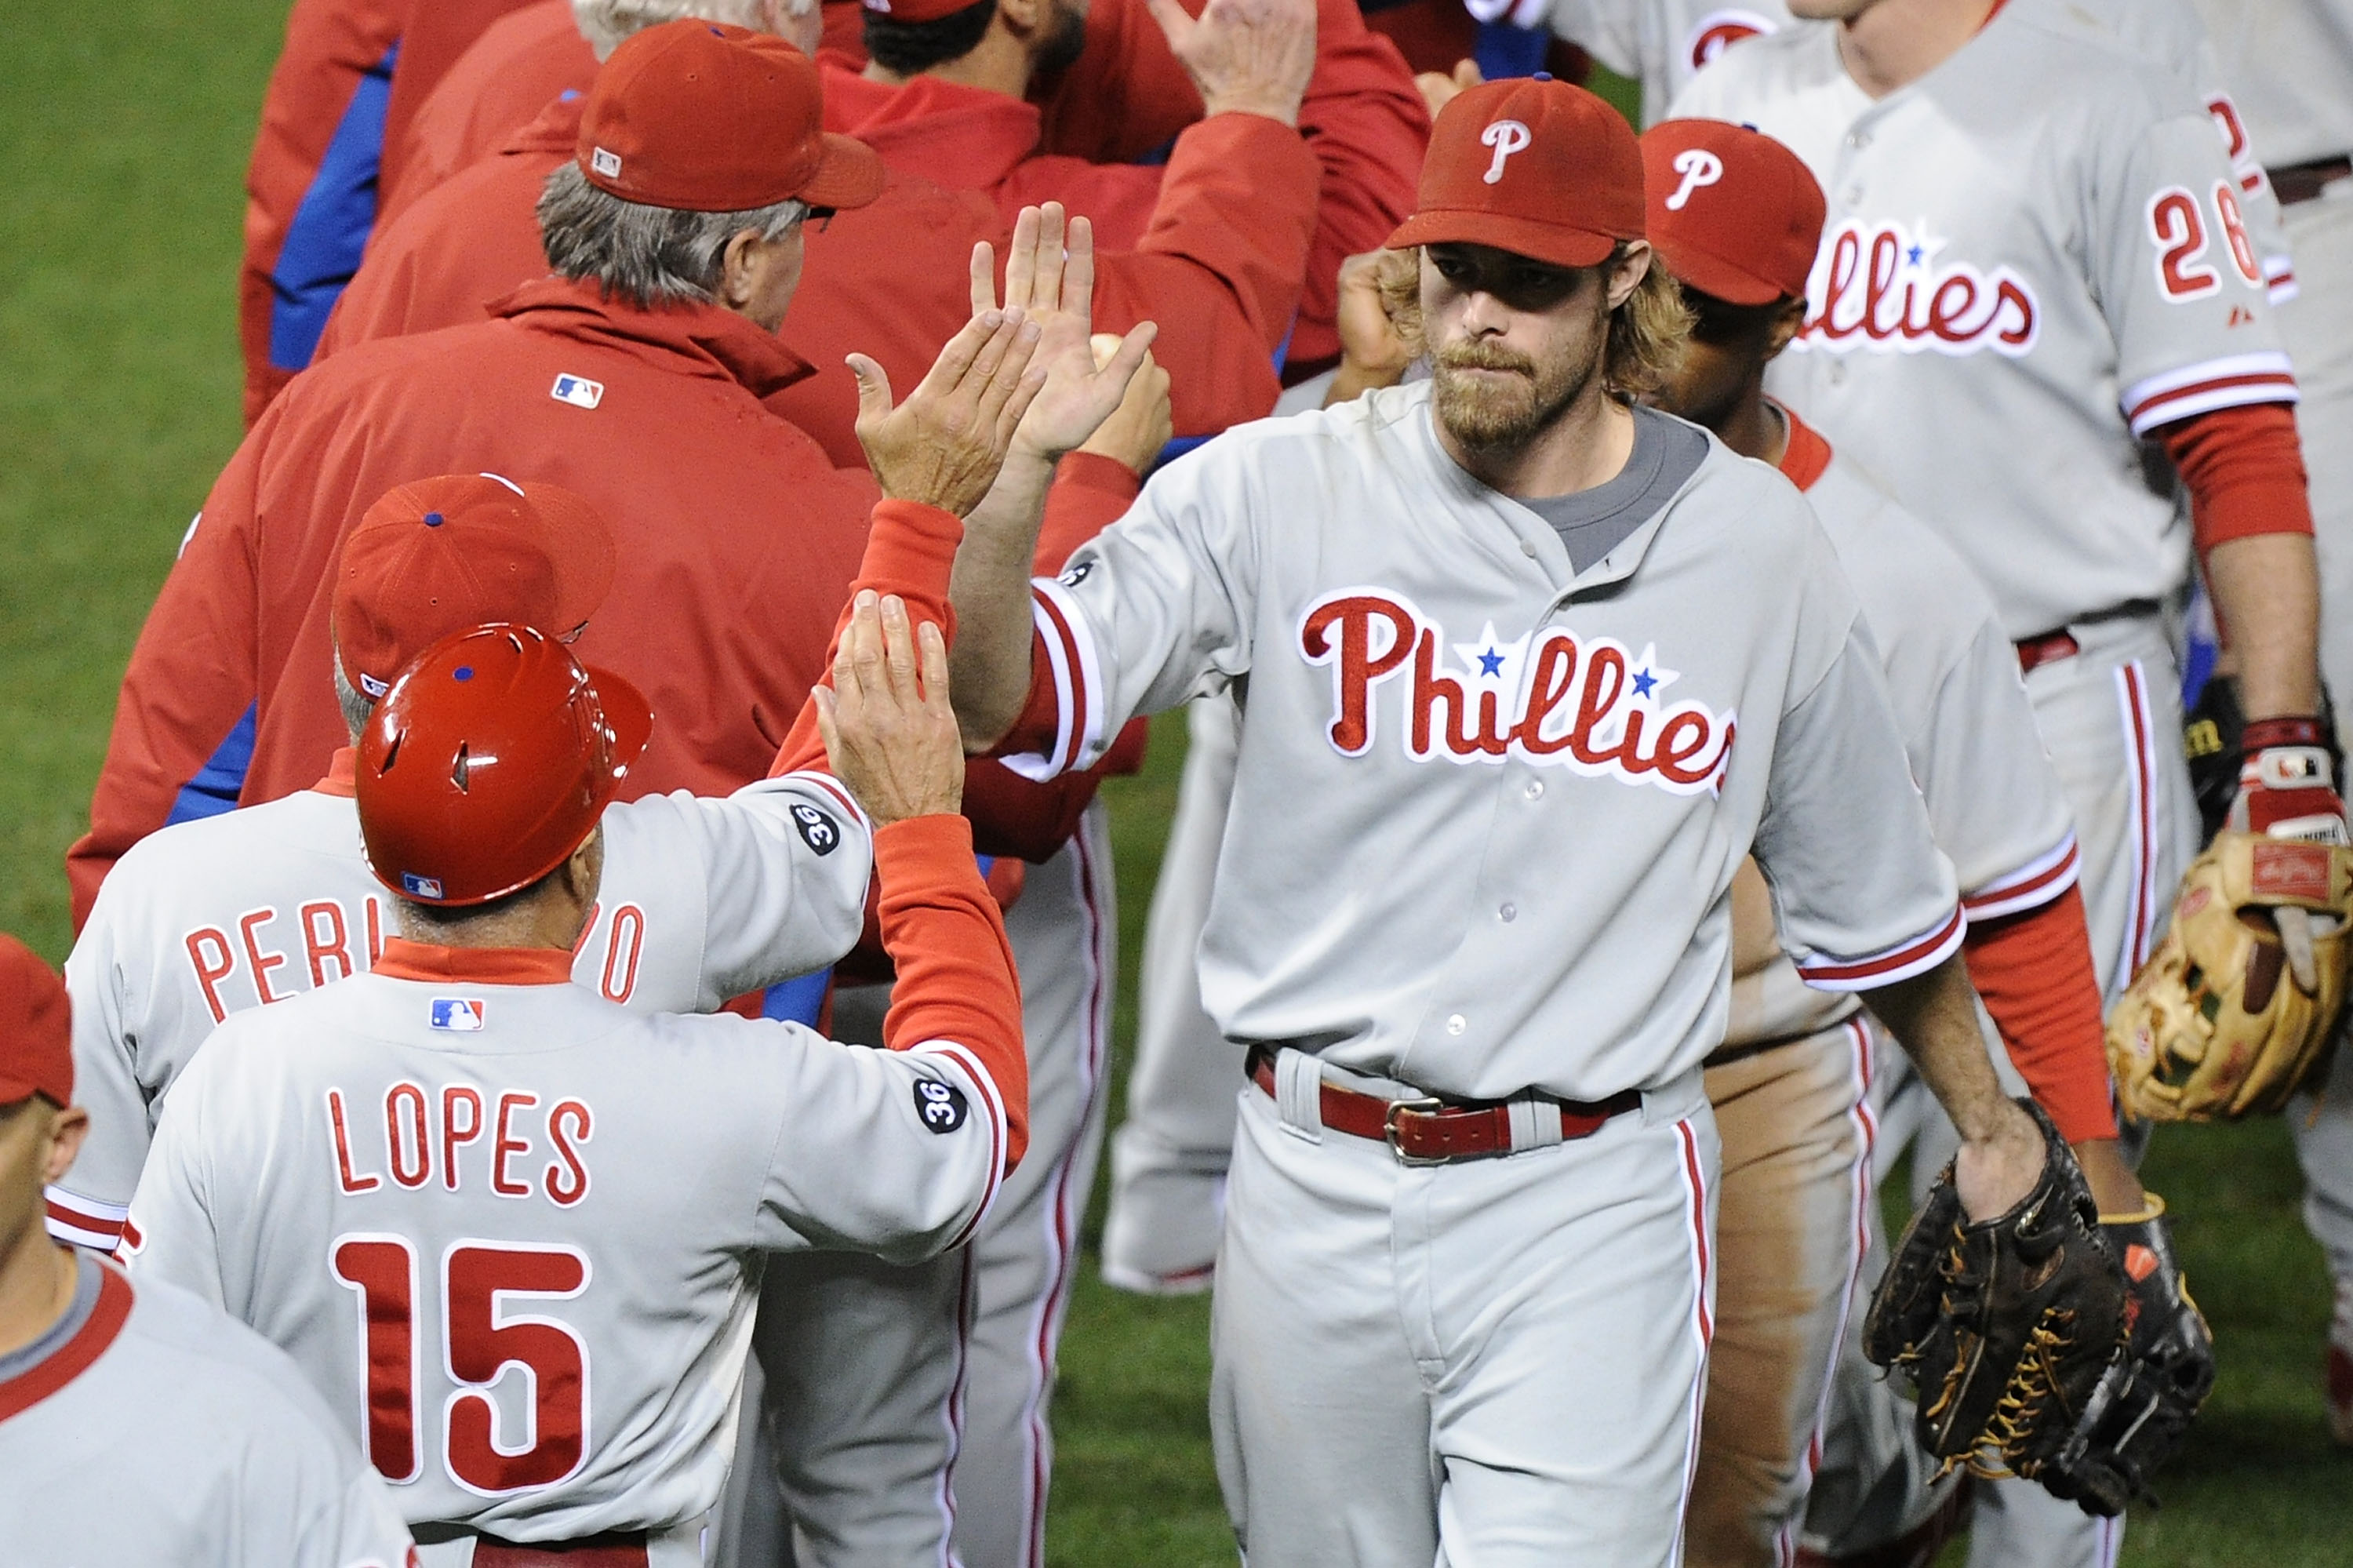 Jayson Werth says he has “no animosity” towards Phillies fans  Phillies  Nation - Your source for Philadelphia Phillies news, opinion, history,  rumors, events, and other fun stuff.